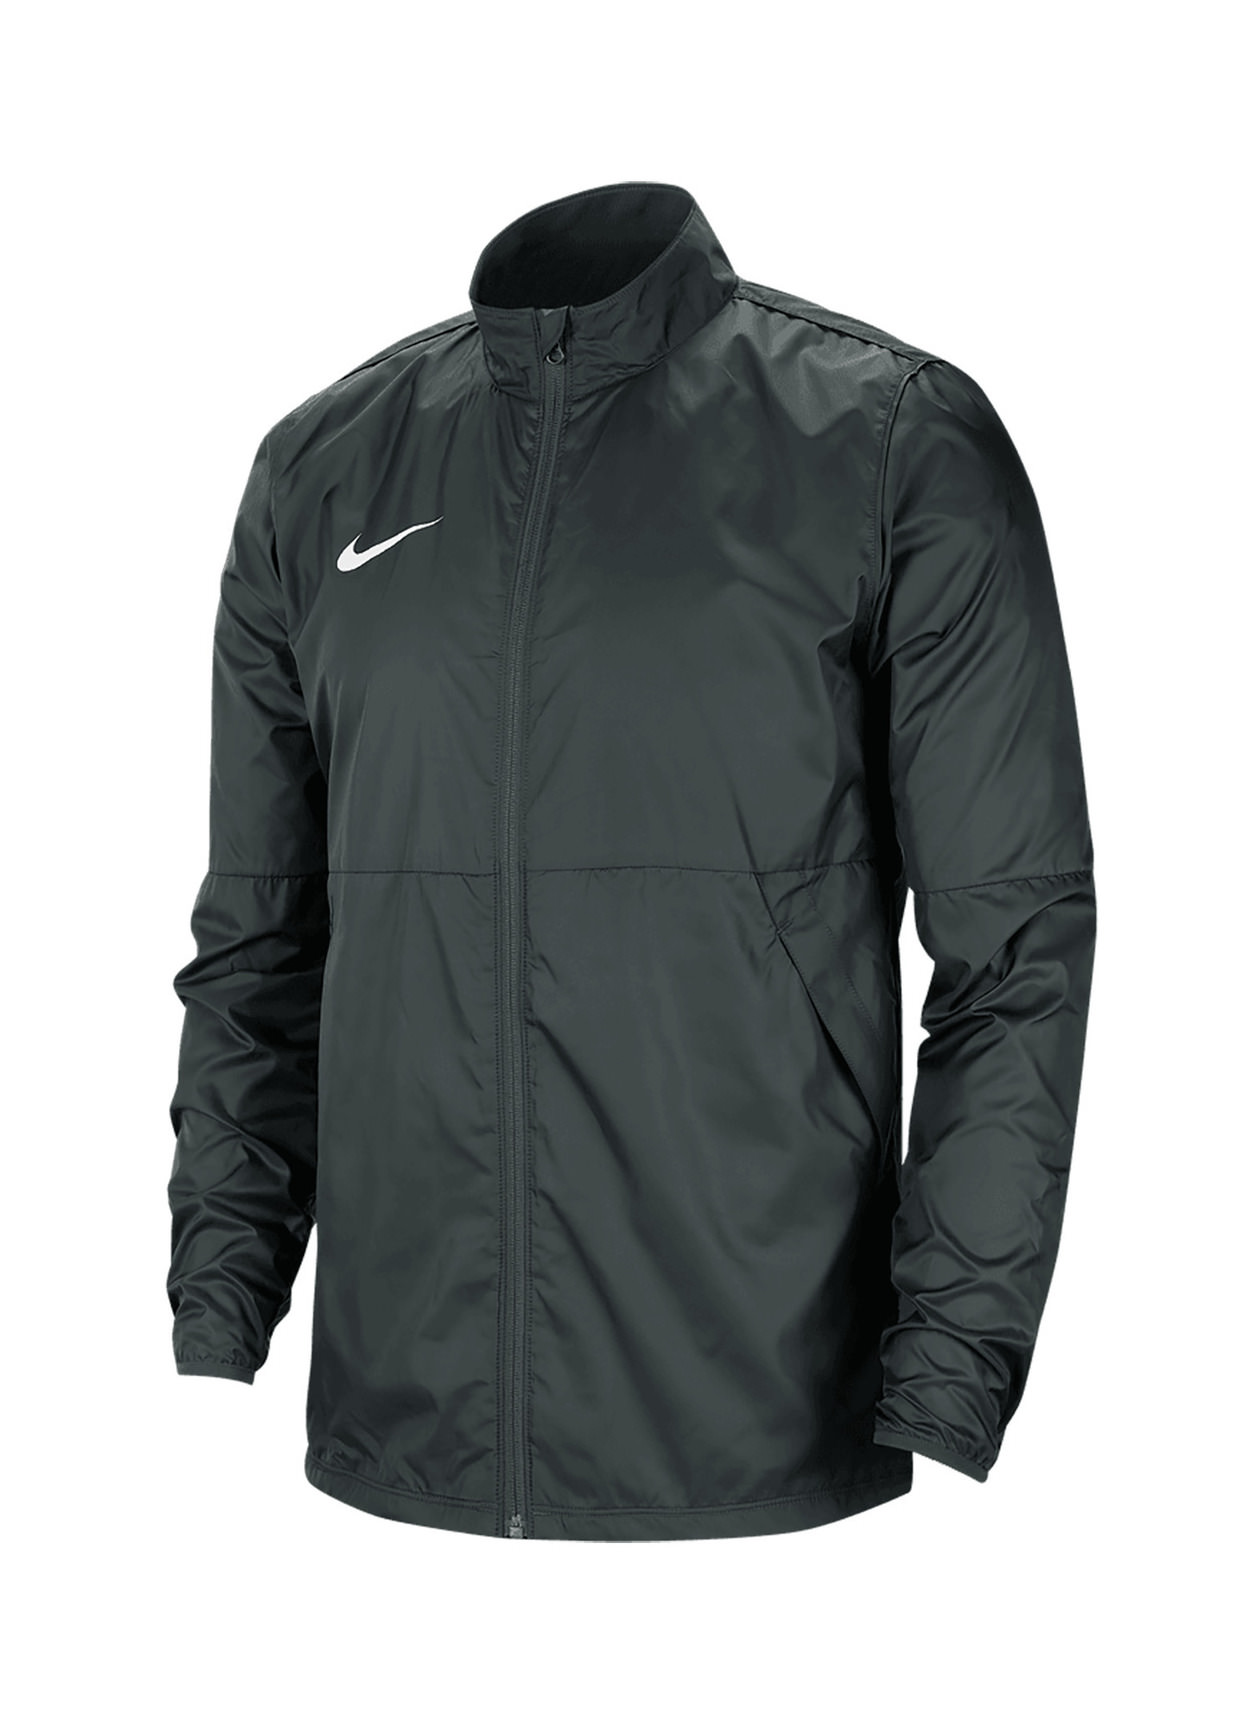 Nike Men's Anthracite / Anthracite / White Woven Repel Jacket